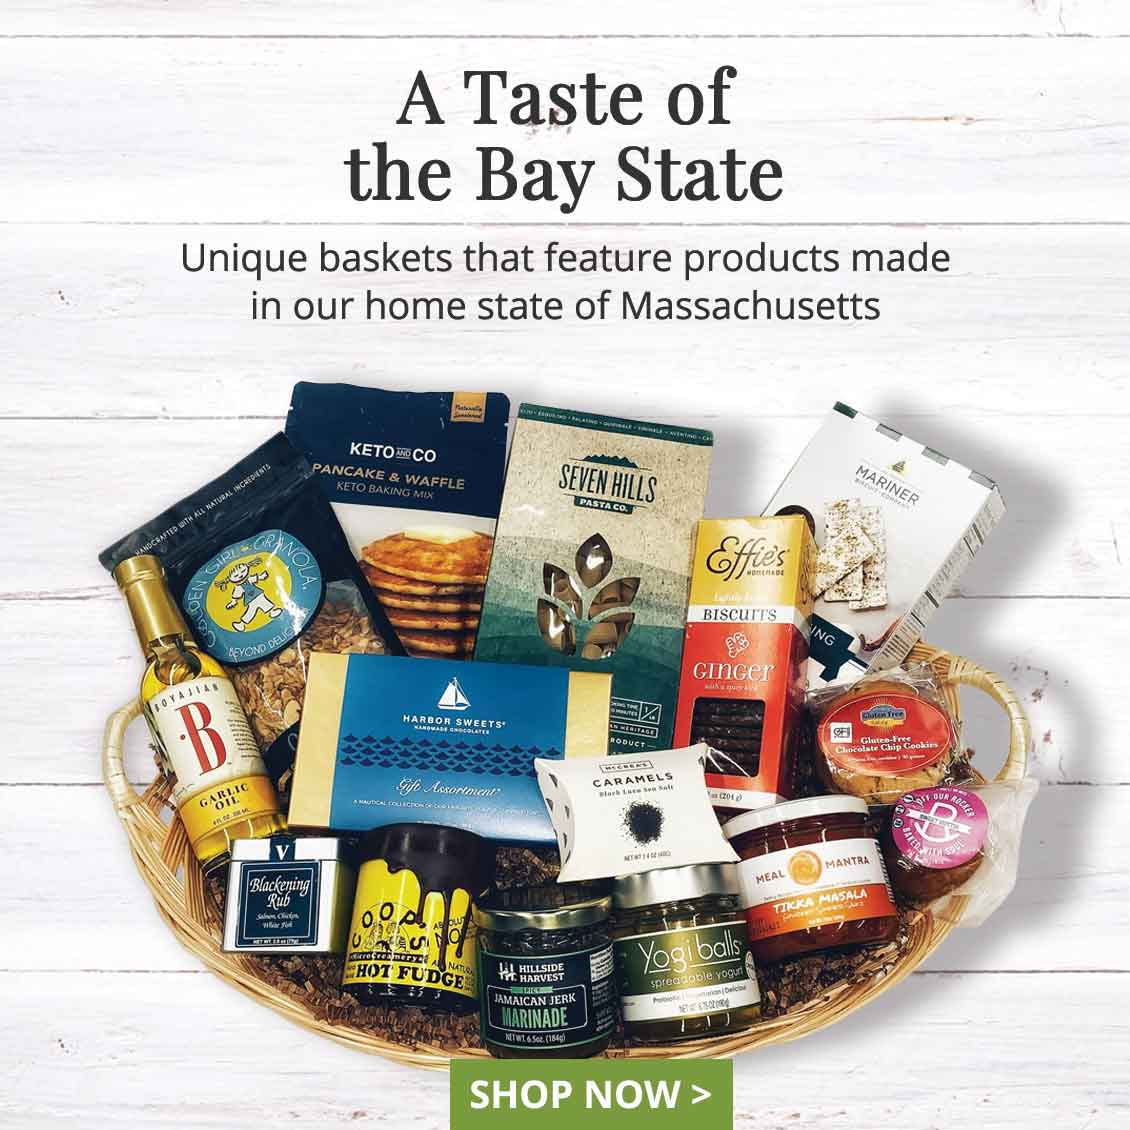 A Taste of the Bay State